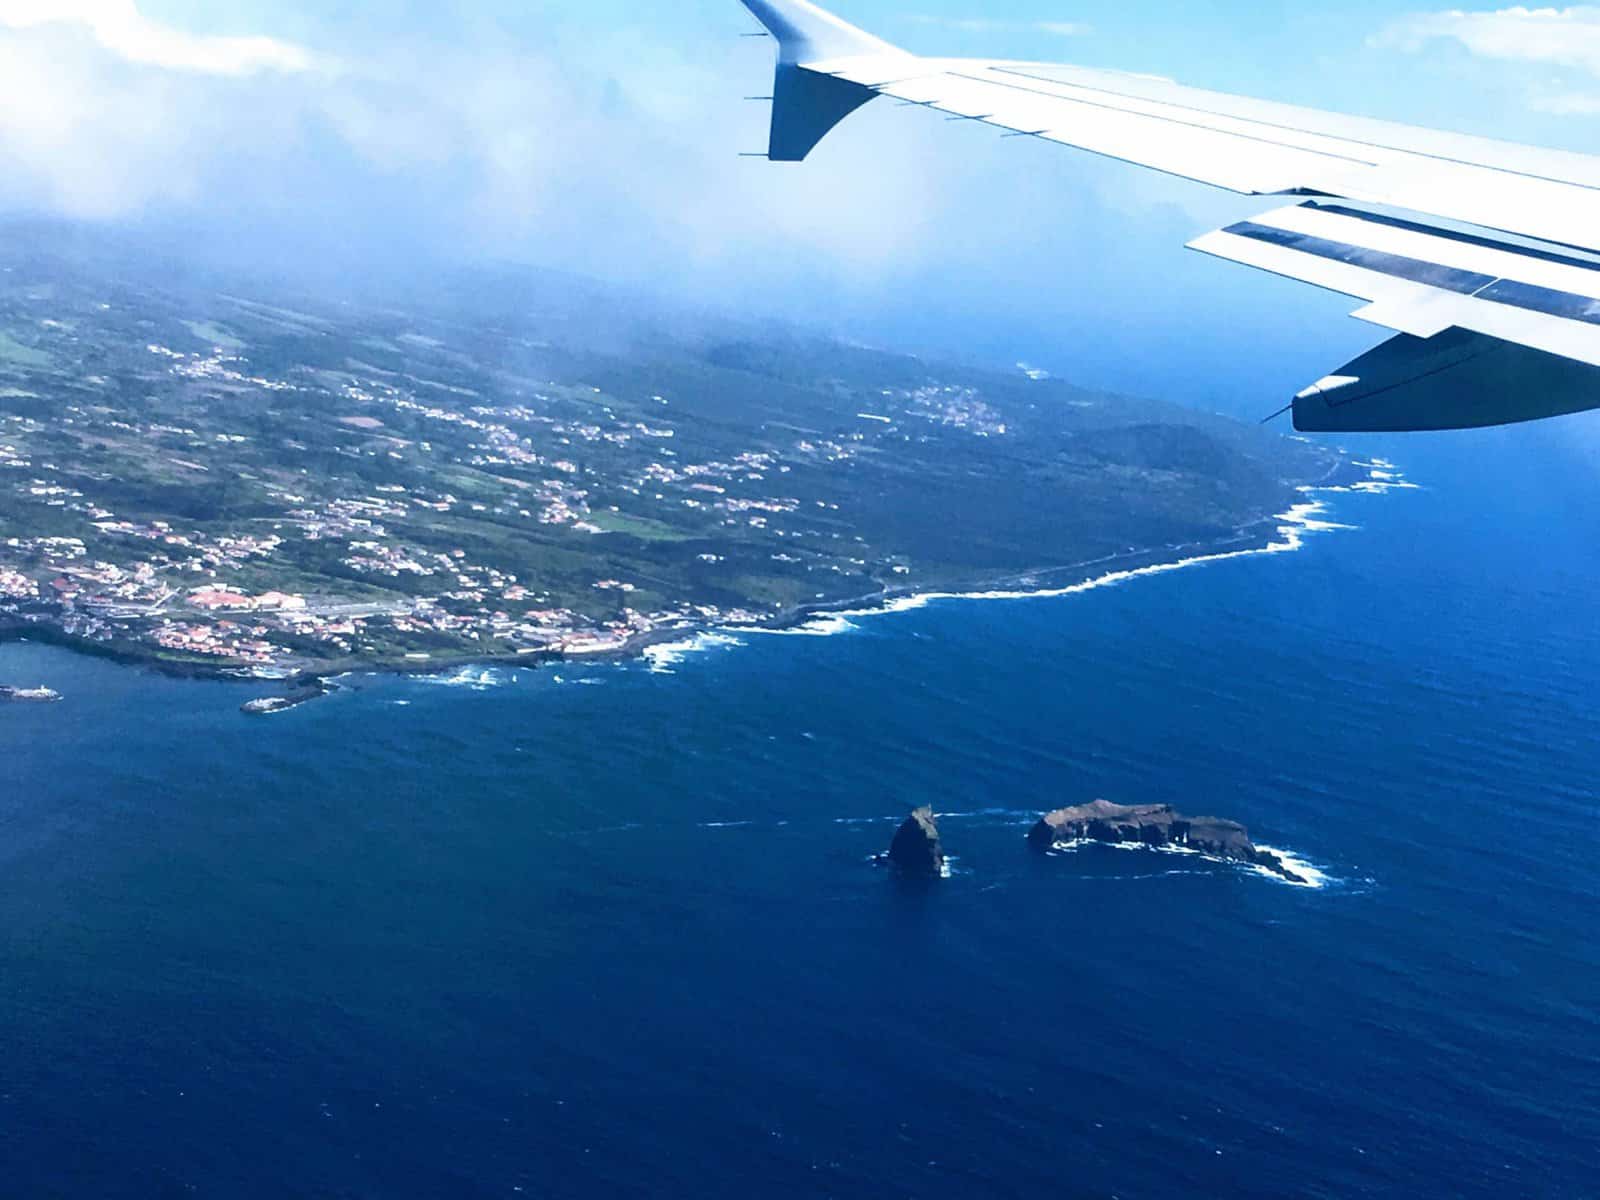 The view of the Azores from the plane